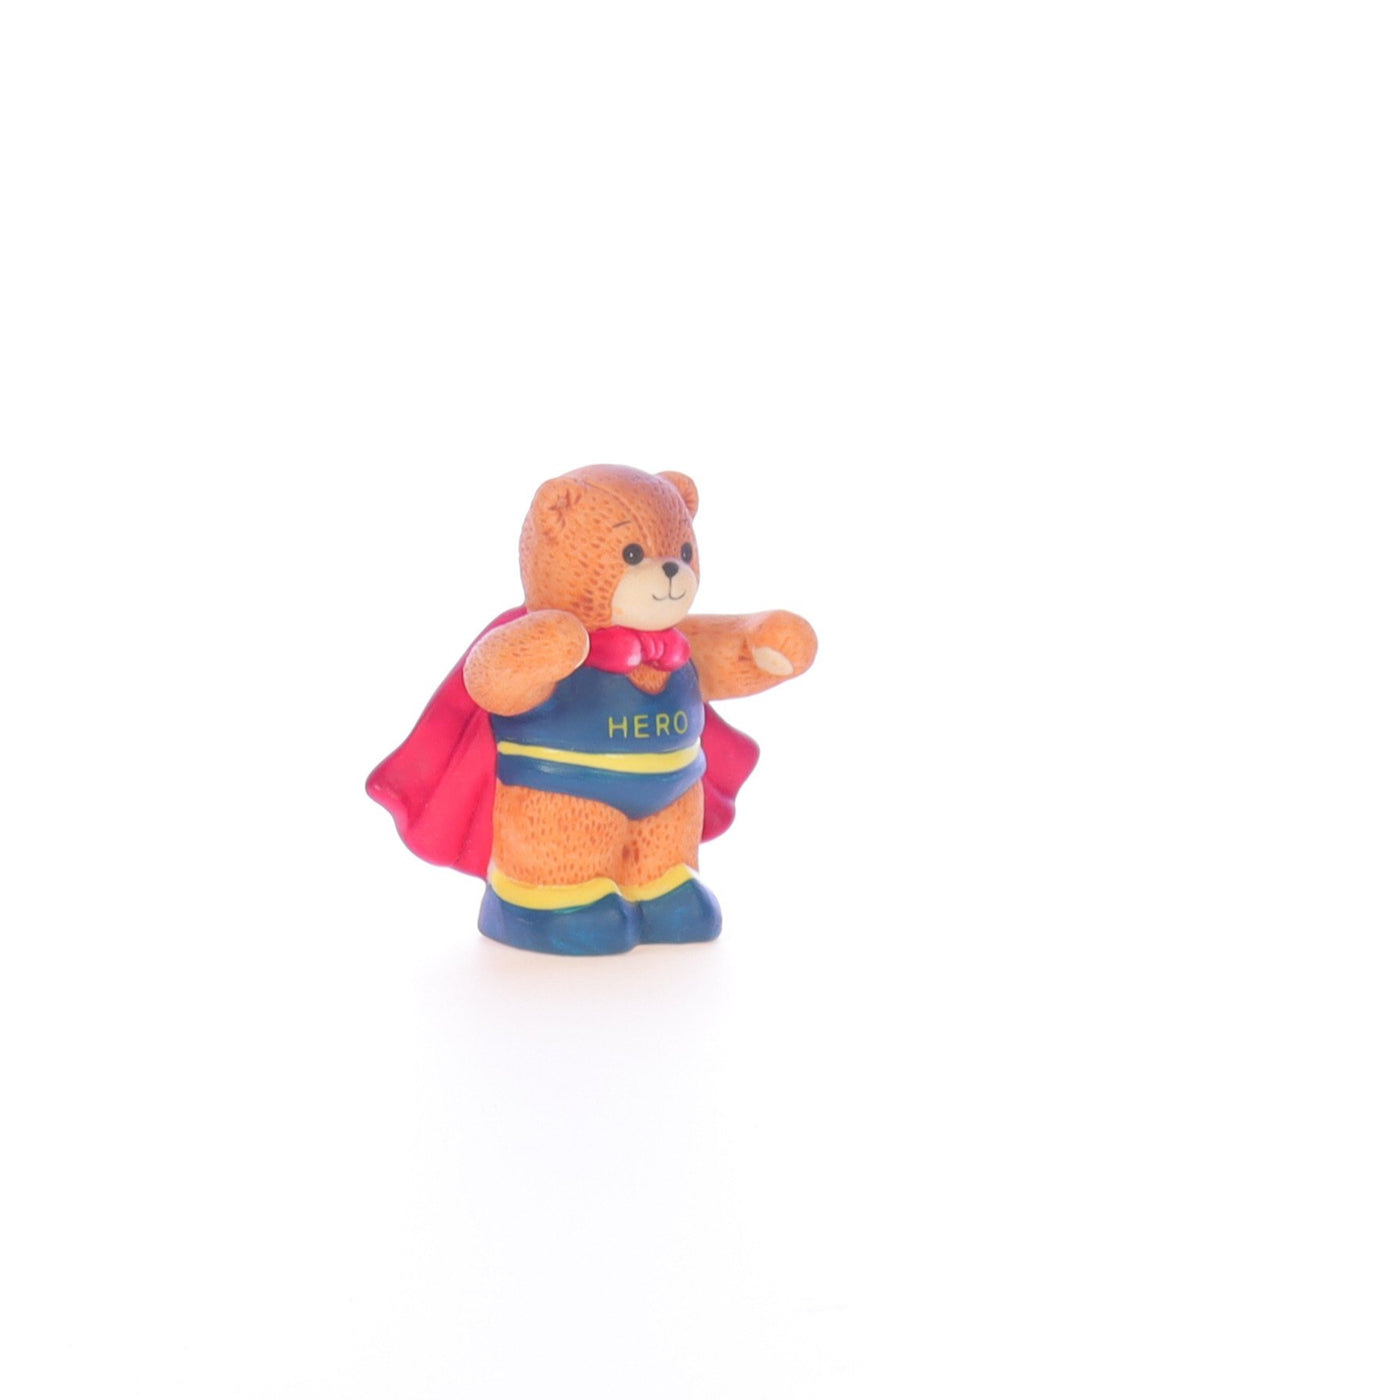 Lucy_And_Me_by_Lucy_Atwell_Porcelain_Figurine_Bear_in_Super_Hero_Costume_Lucy_Unknown_029_08